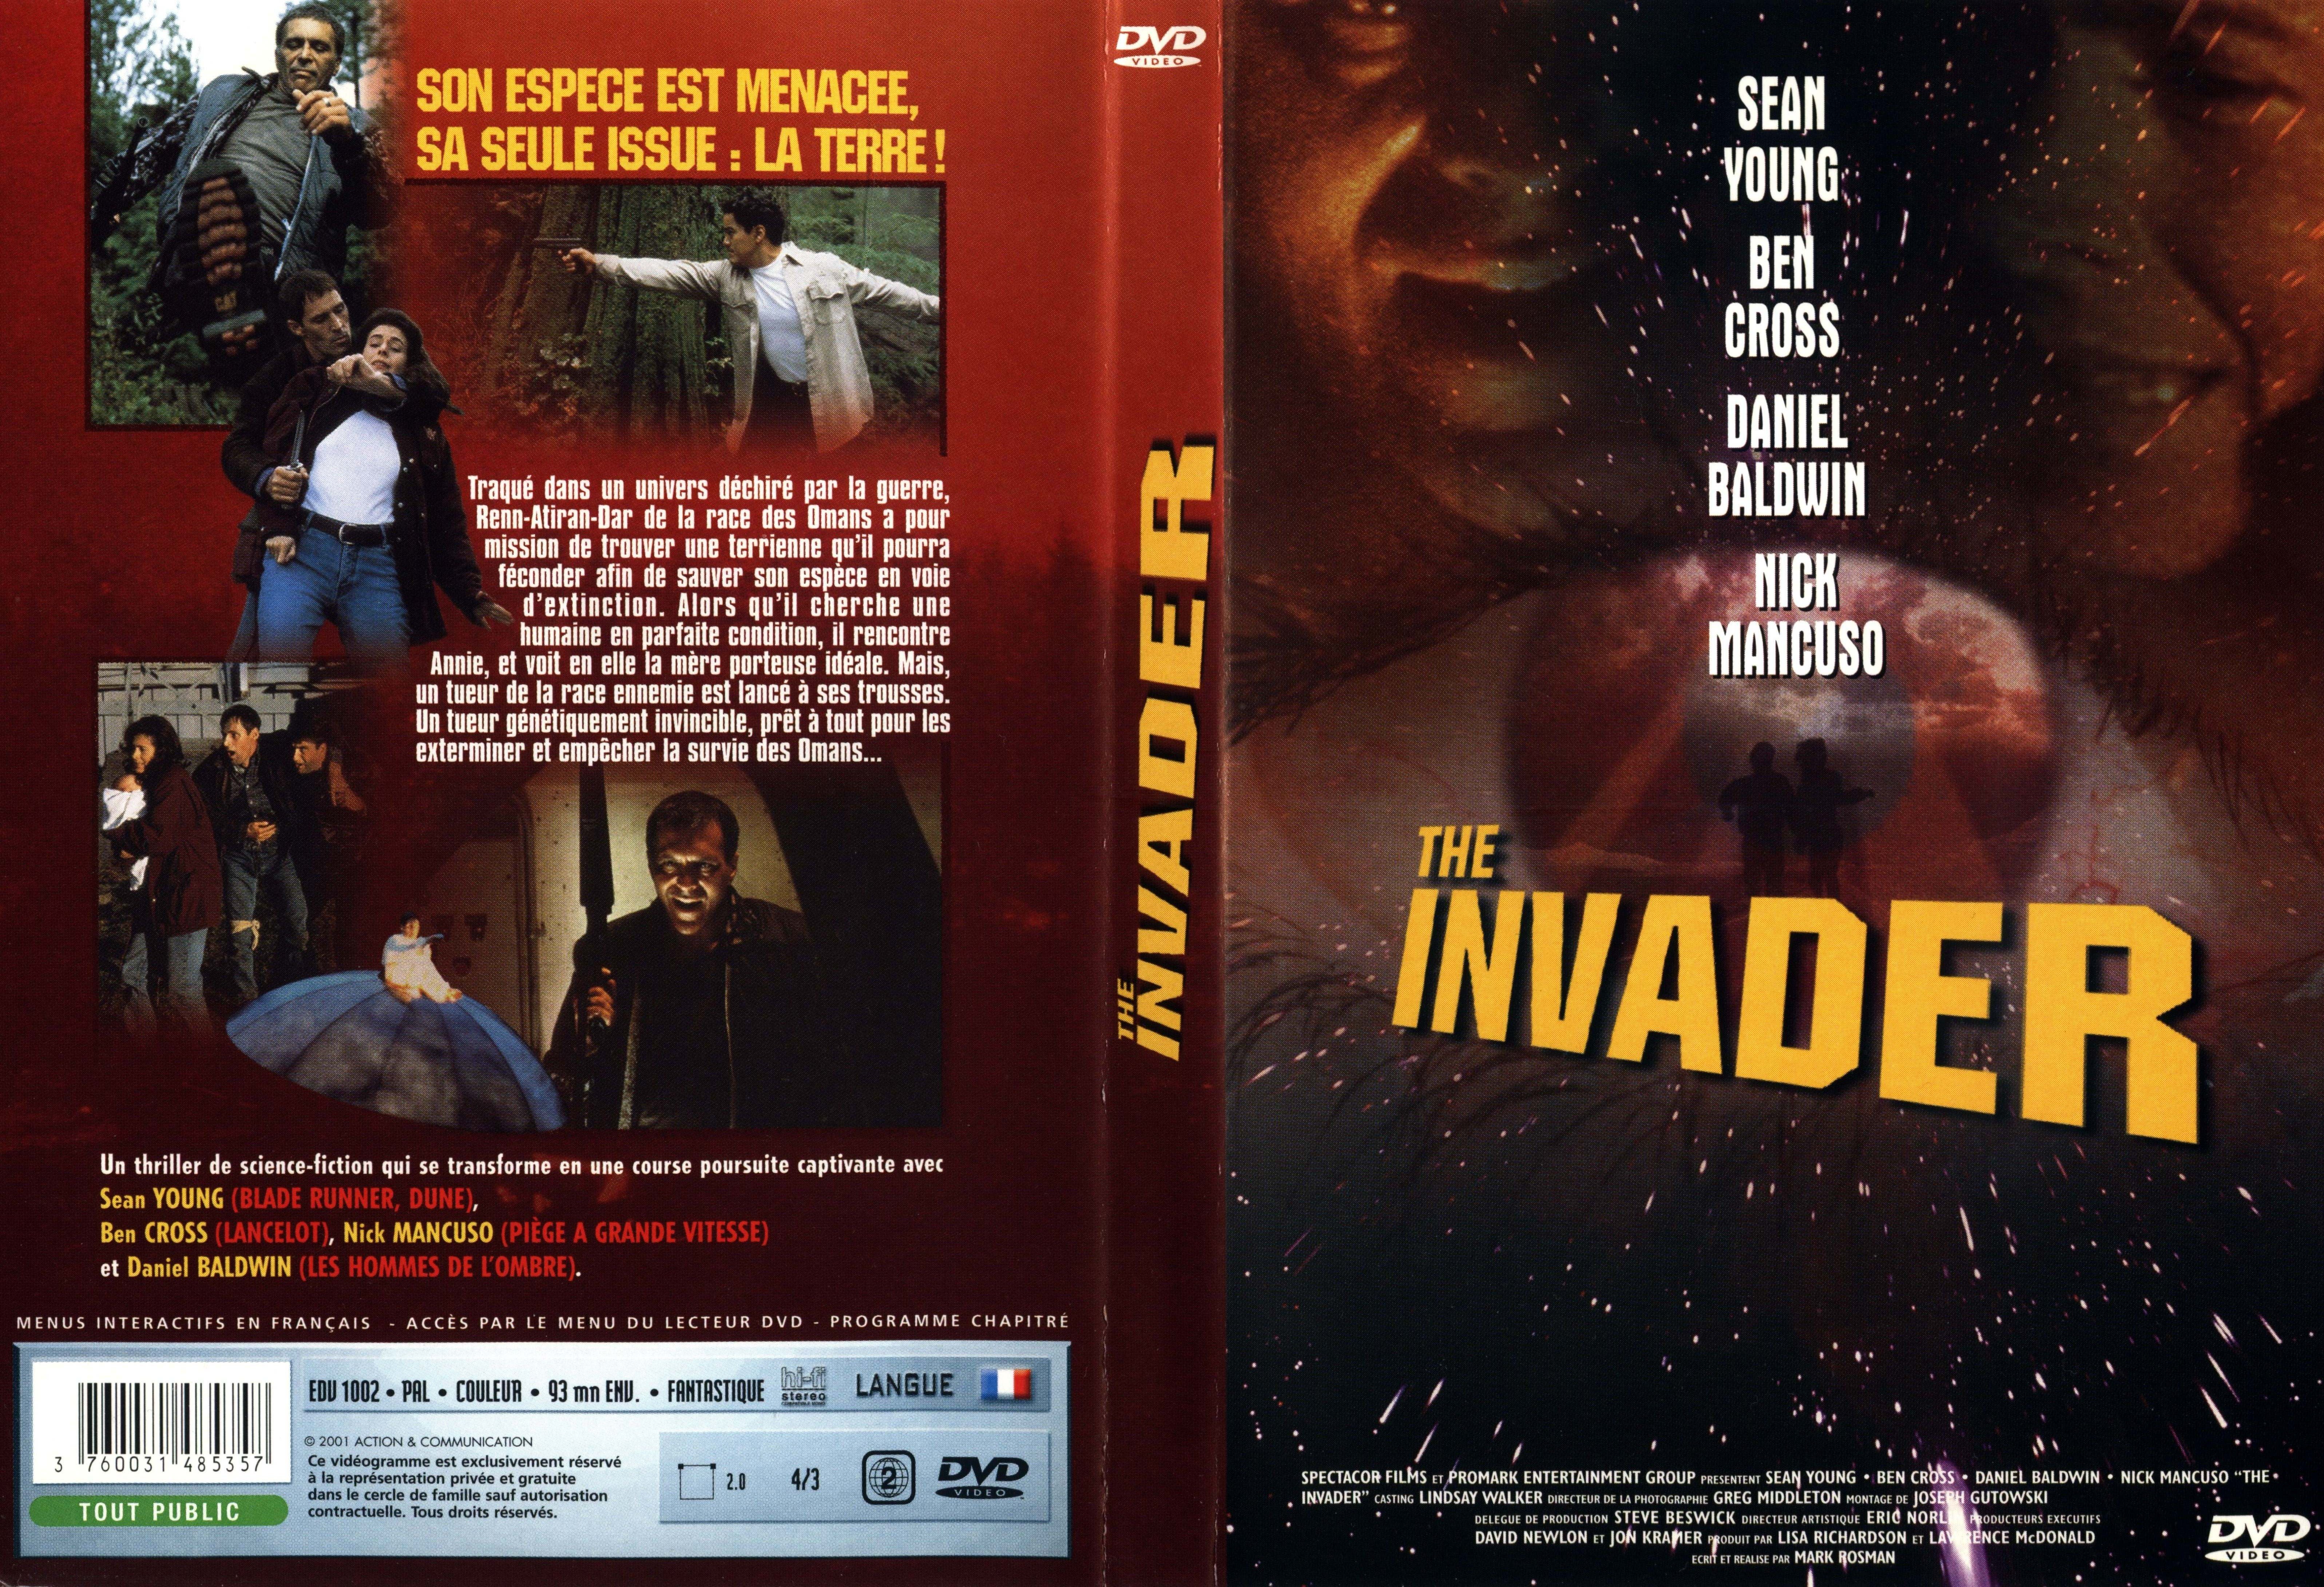 Jaquette DVD The invader